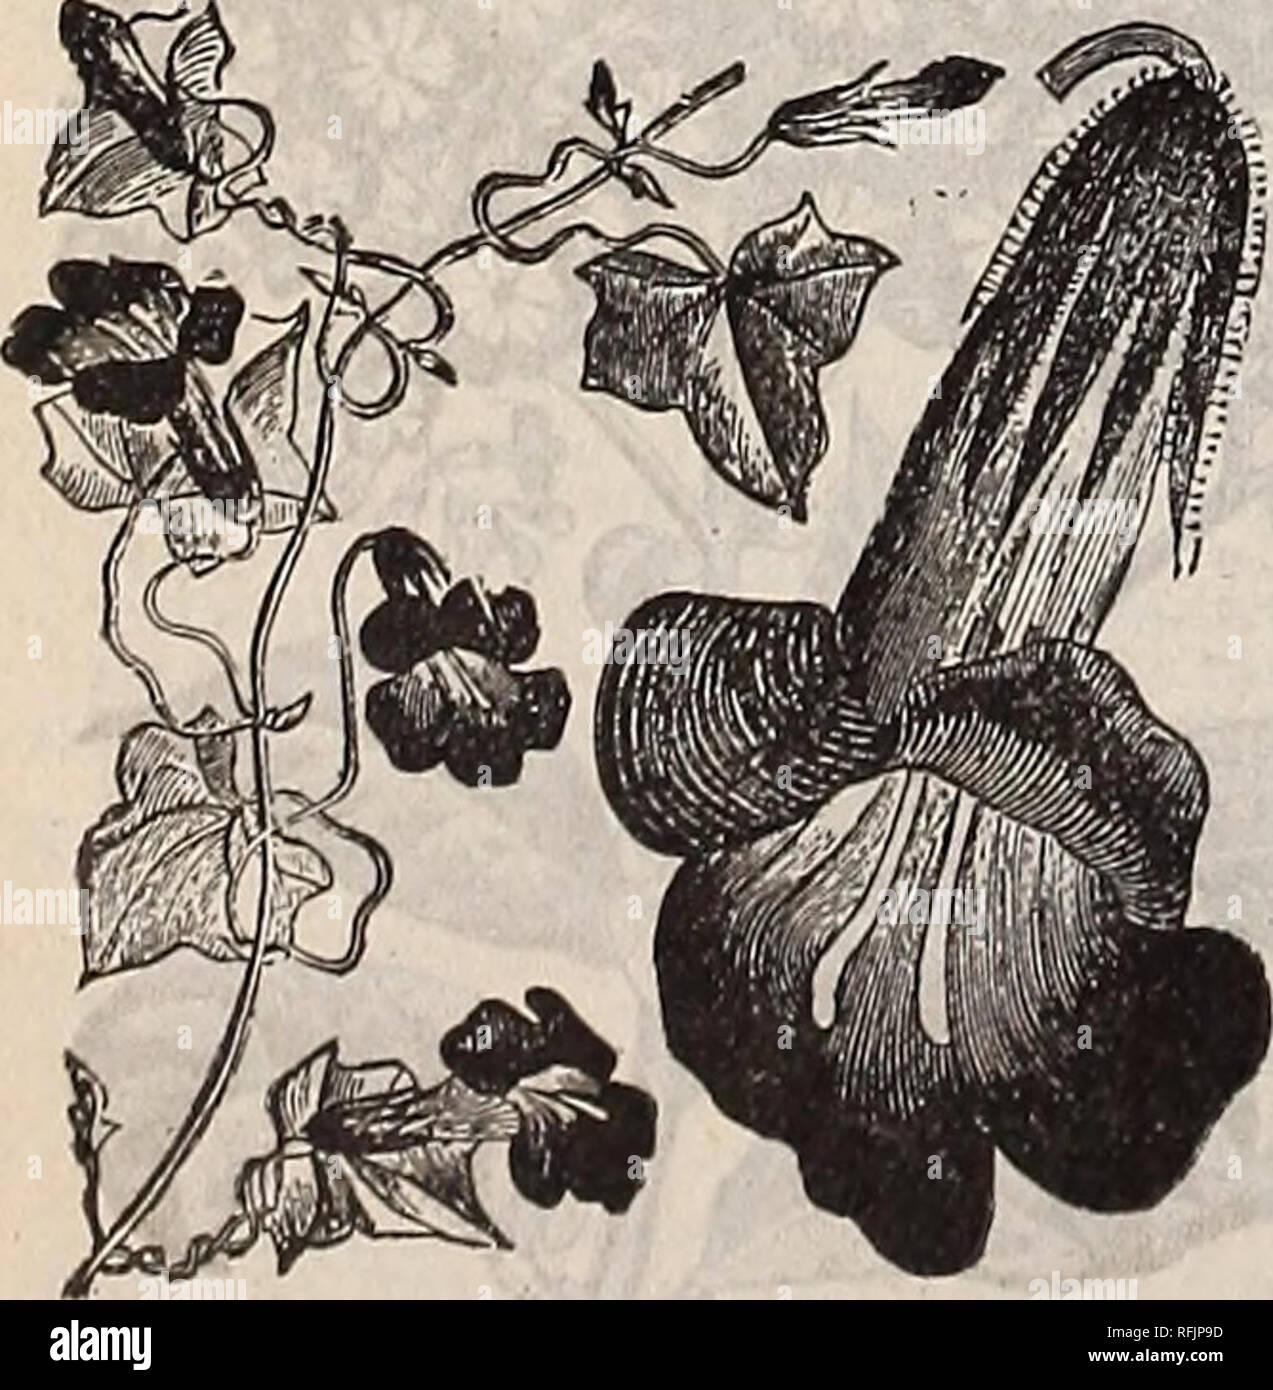 . Spring catalogue : 1899. Nurseries (Horticulture) Missouri Saint Louis Catalogs; Bulbs (Plants) Catalogs; Flowers Catalogs; Vegetables Seeds Catalogs; Plants, Ornamental Catalogs; Fruit Catalogs. Maragold. MOONFLOWER (Ipomea Grandiflora.) These have become celebrated as the fastest growing of all the summer climbers, They grow with marvelous rapidity, reach- ing a height of 40 or 50 feet in a lew weeks, and are covered with large, pure white, fragrant flow- ers In the evening and on cloudy â¢days. For covering trellises, ar- bors, fences, verandas and trees, they are without a rival. Pkt. 10 Stock Photo